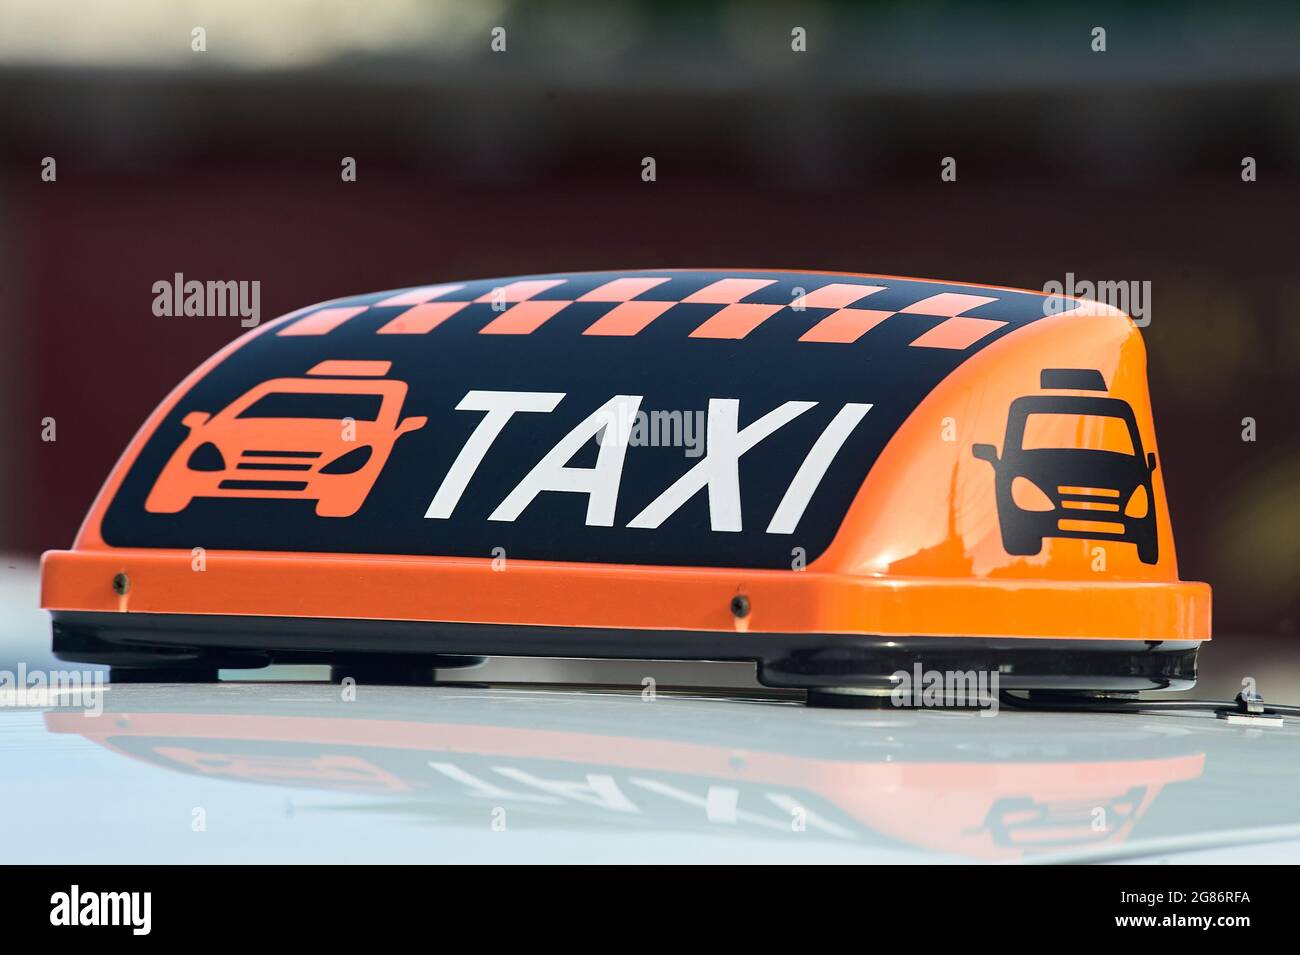 an orange taxi sign stands on the roof of the car Stock Photo